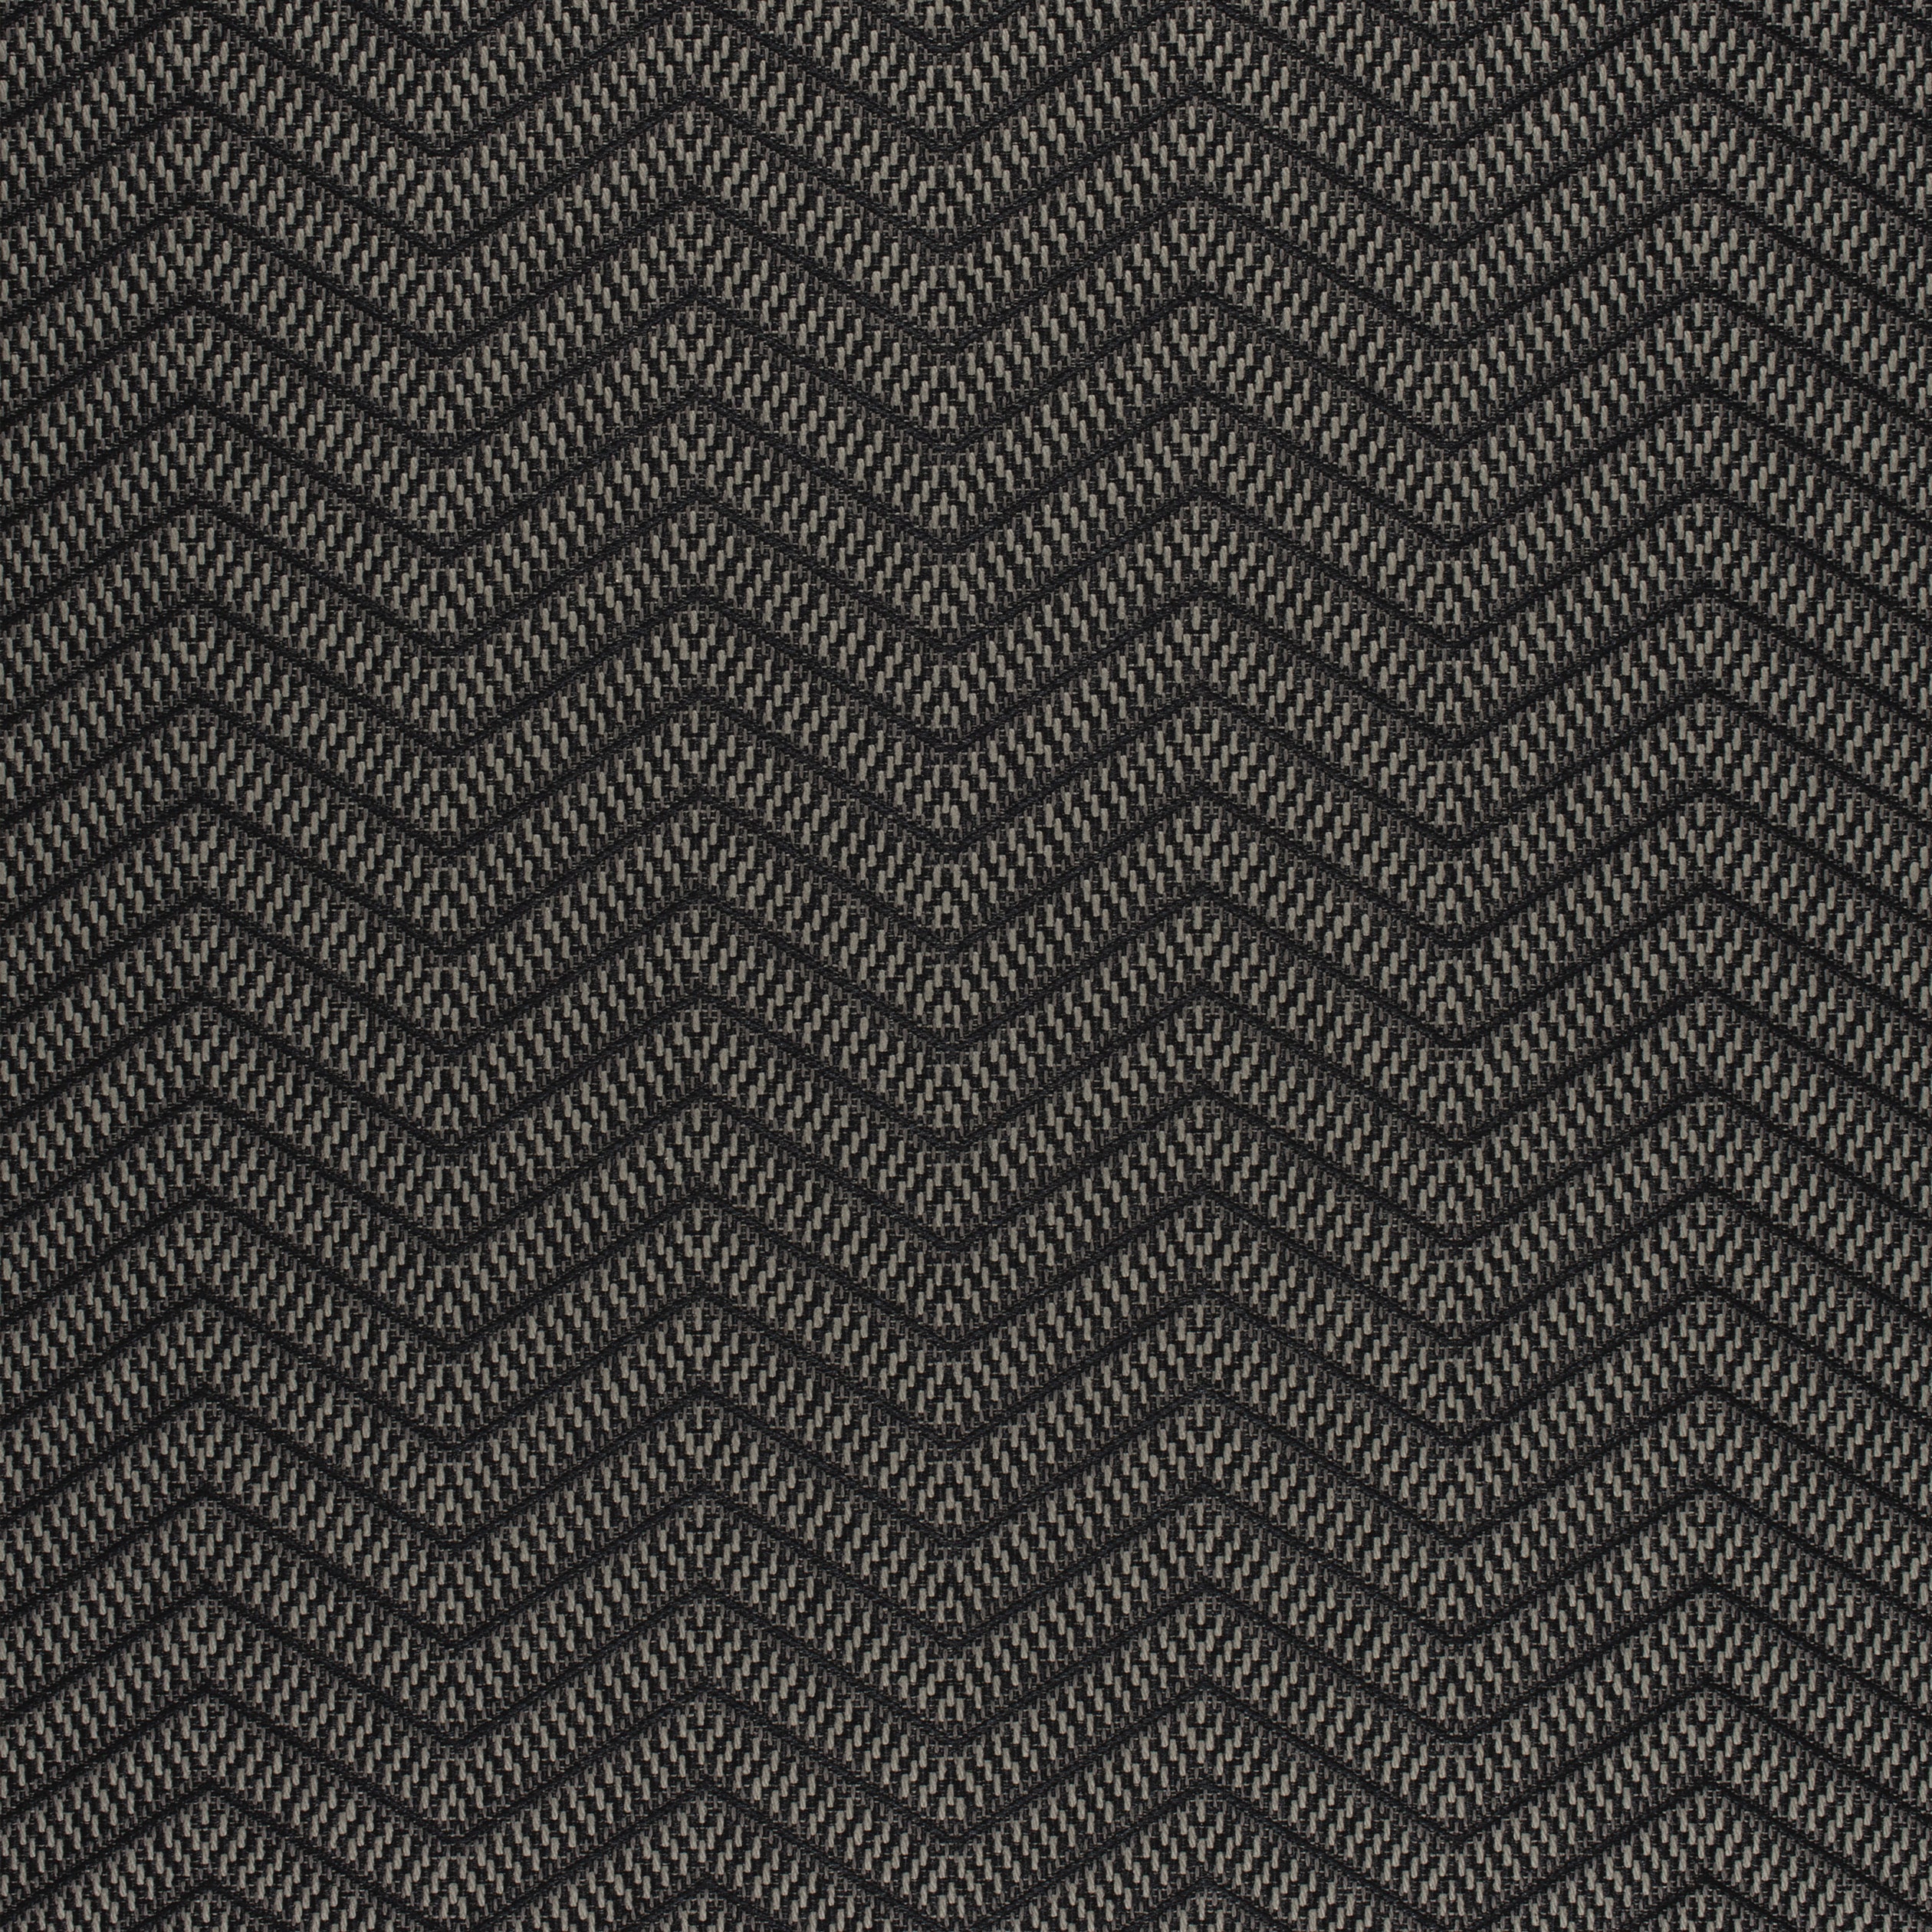 Matari Chevron fabric in black color - pattern number W80638 - by Thibaut in the Pinnacle collection